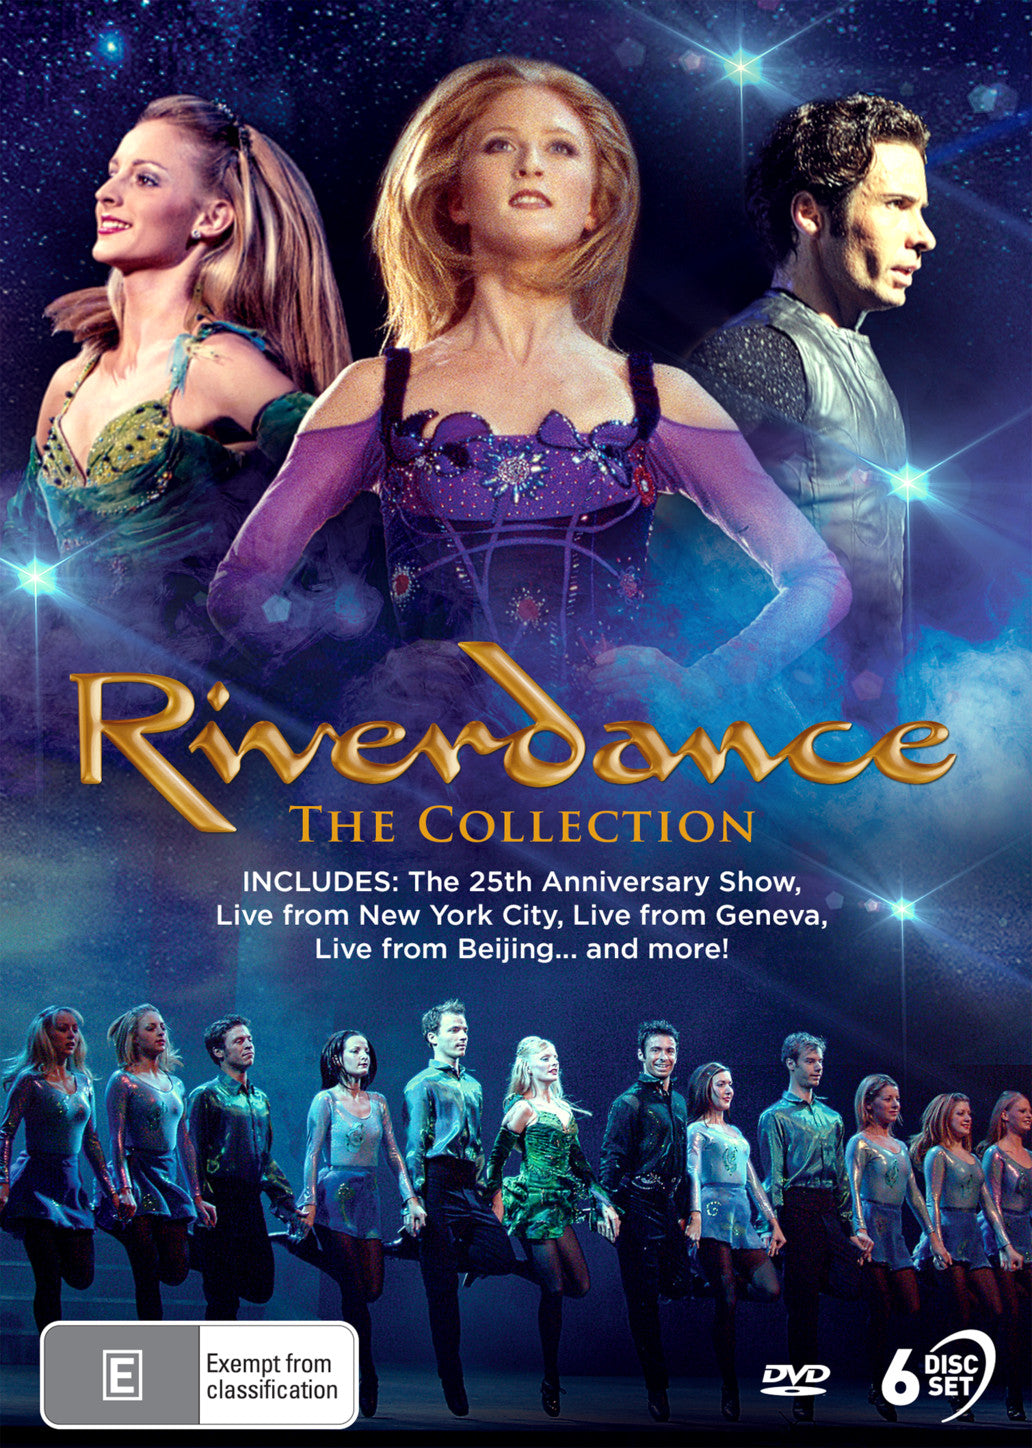 RIVERDANCE: THE COLLECTION